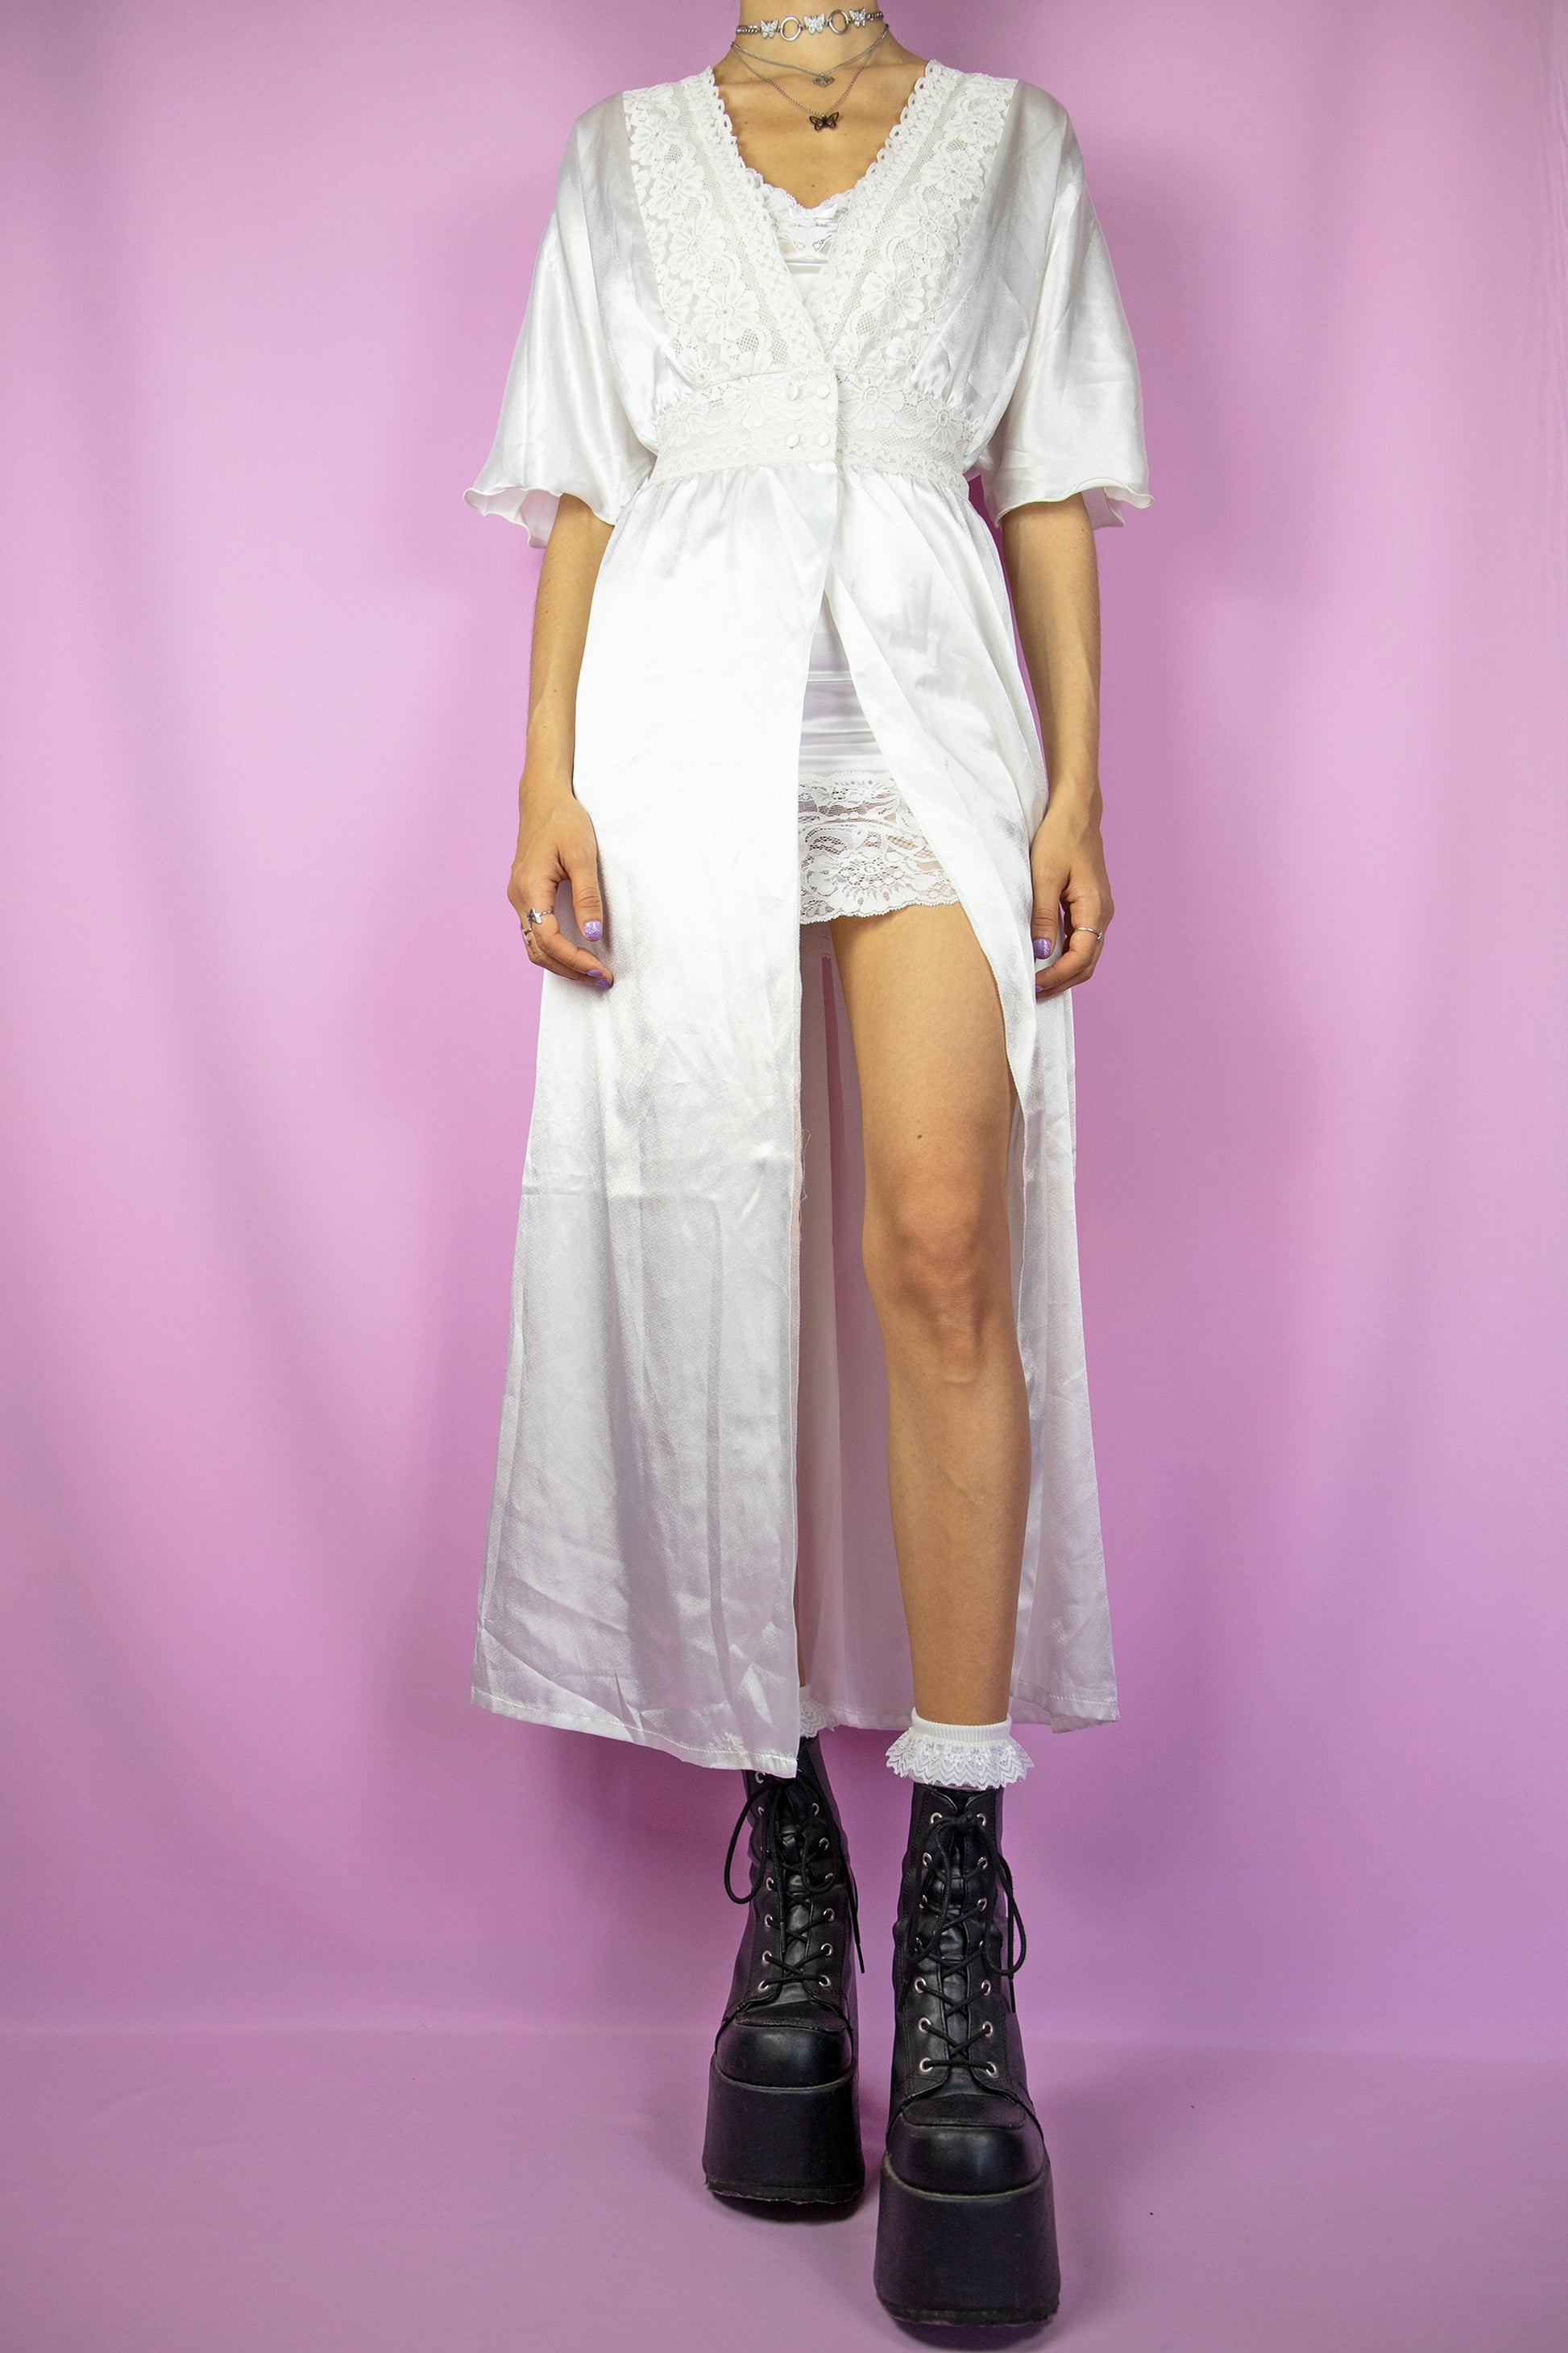 The Vintage 90s White Satin Duster Jacket is a white short-sleeved maxi duster coat with a button closure at the waist and lace details. Romantic 1990s white lace peignoir robe.